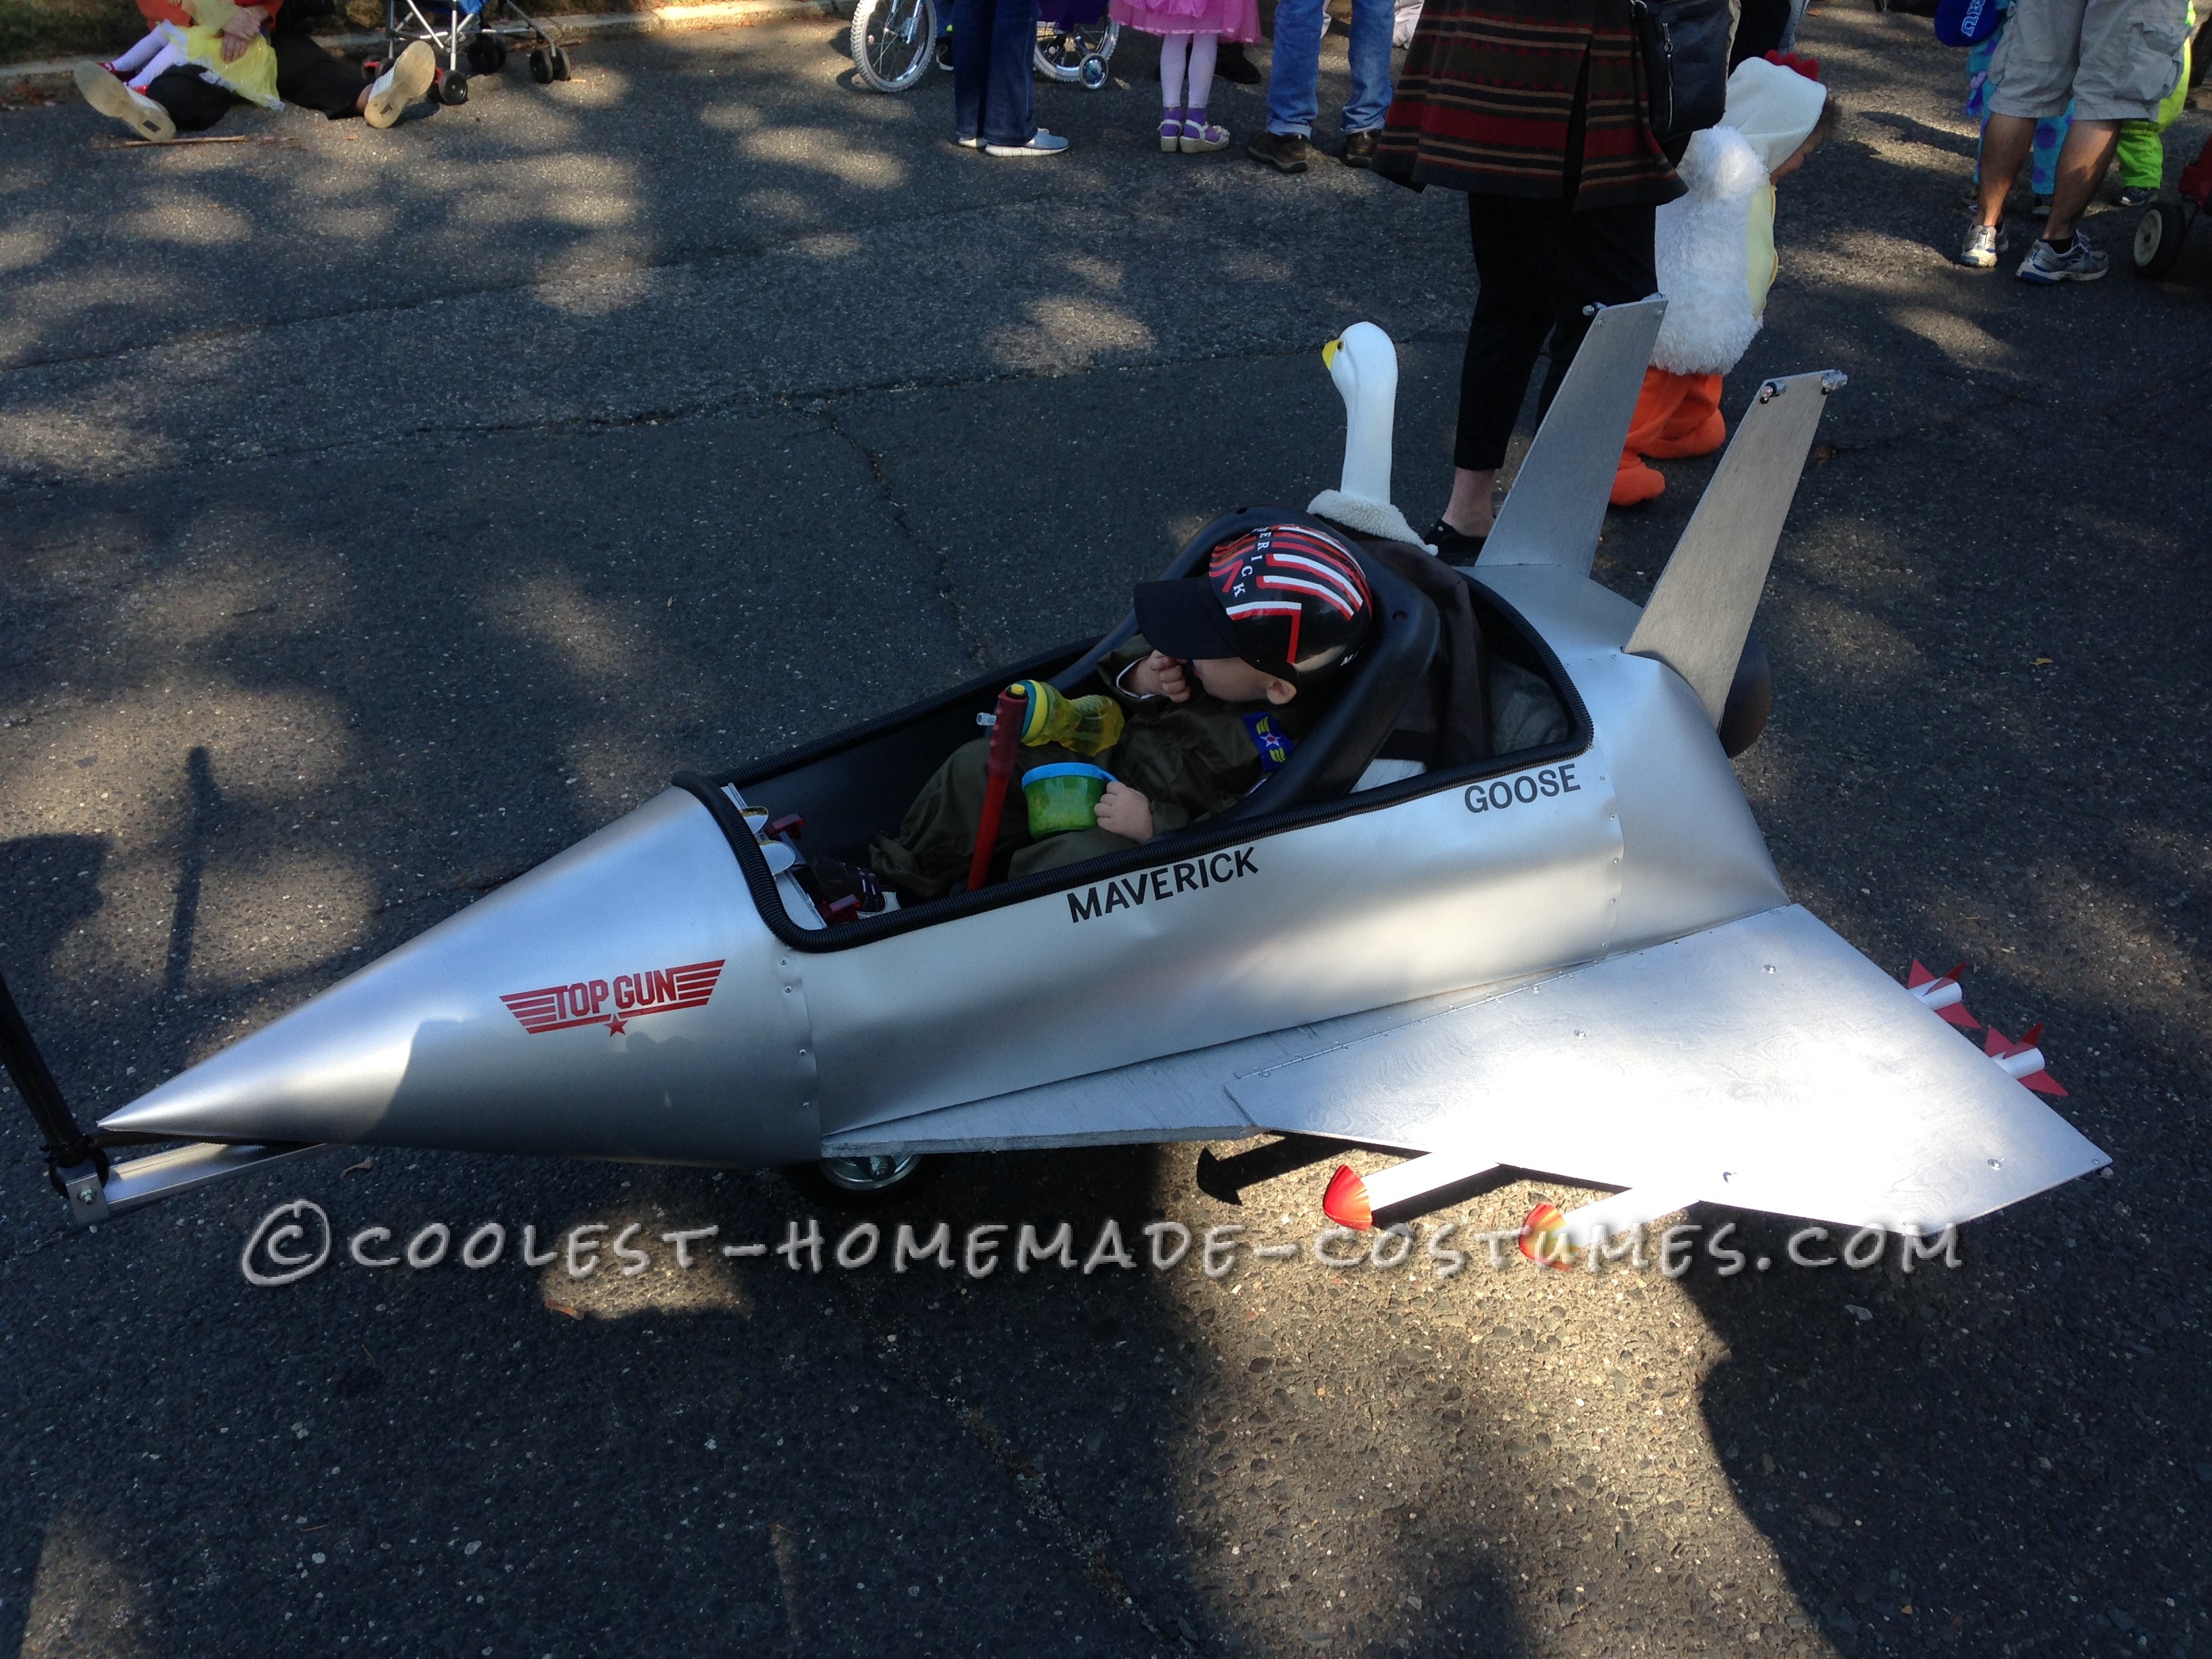 Top Gun Fighter Jet Wagon Costume | Wagon costume, Fighter jets and ...